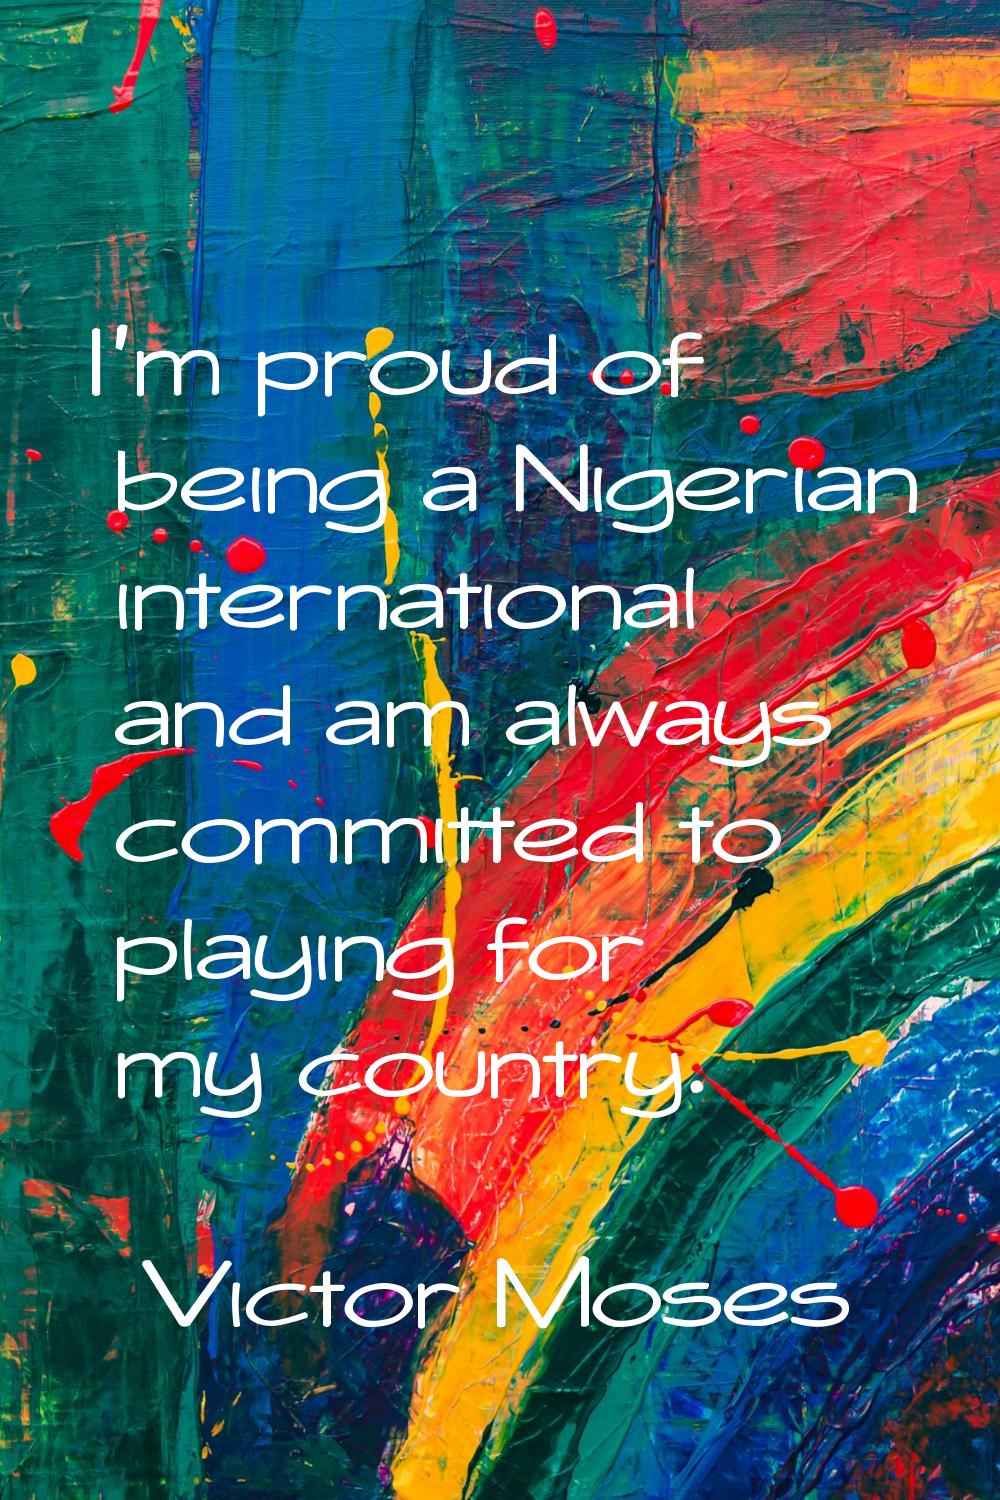 I'm proud of being a Nigerian international and am always committed to playing for my country.